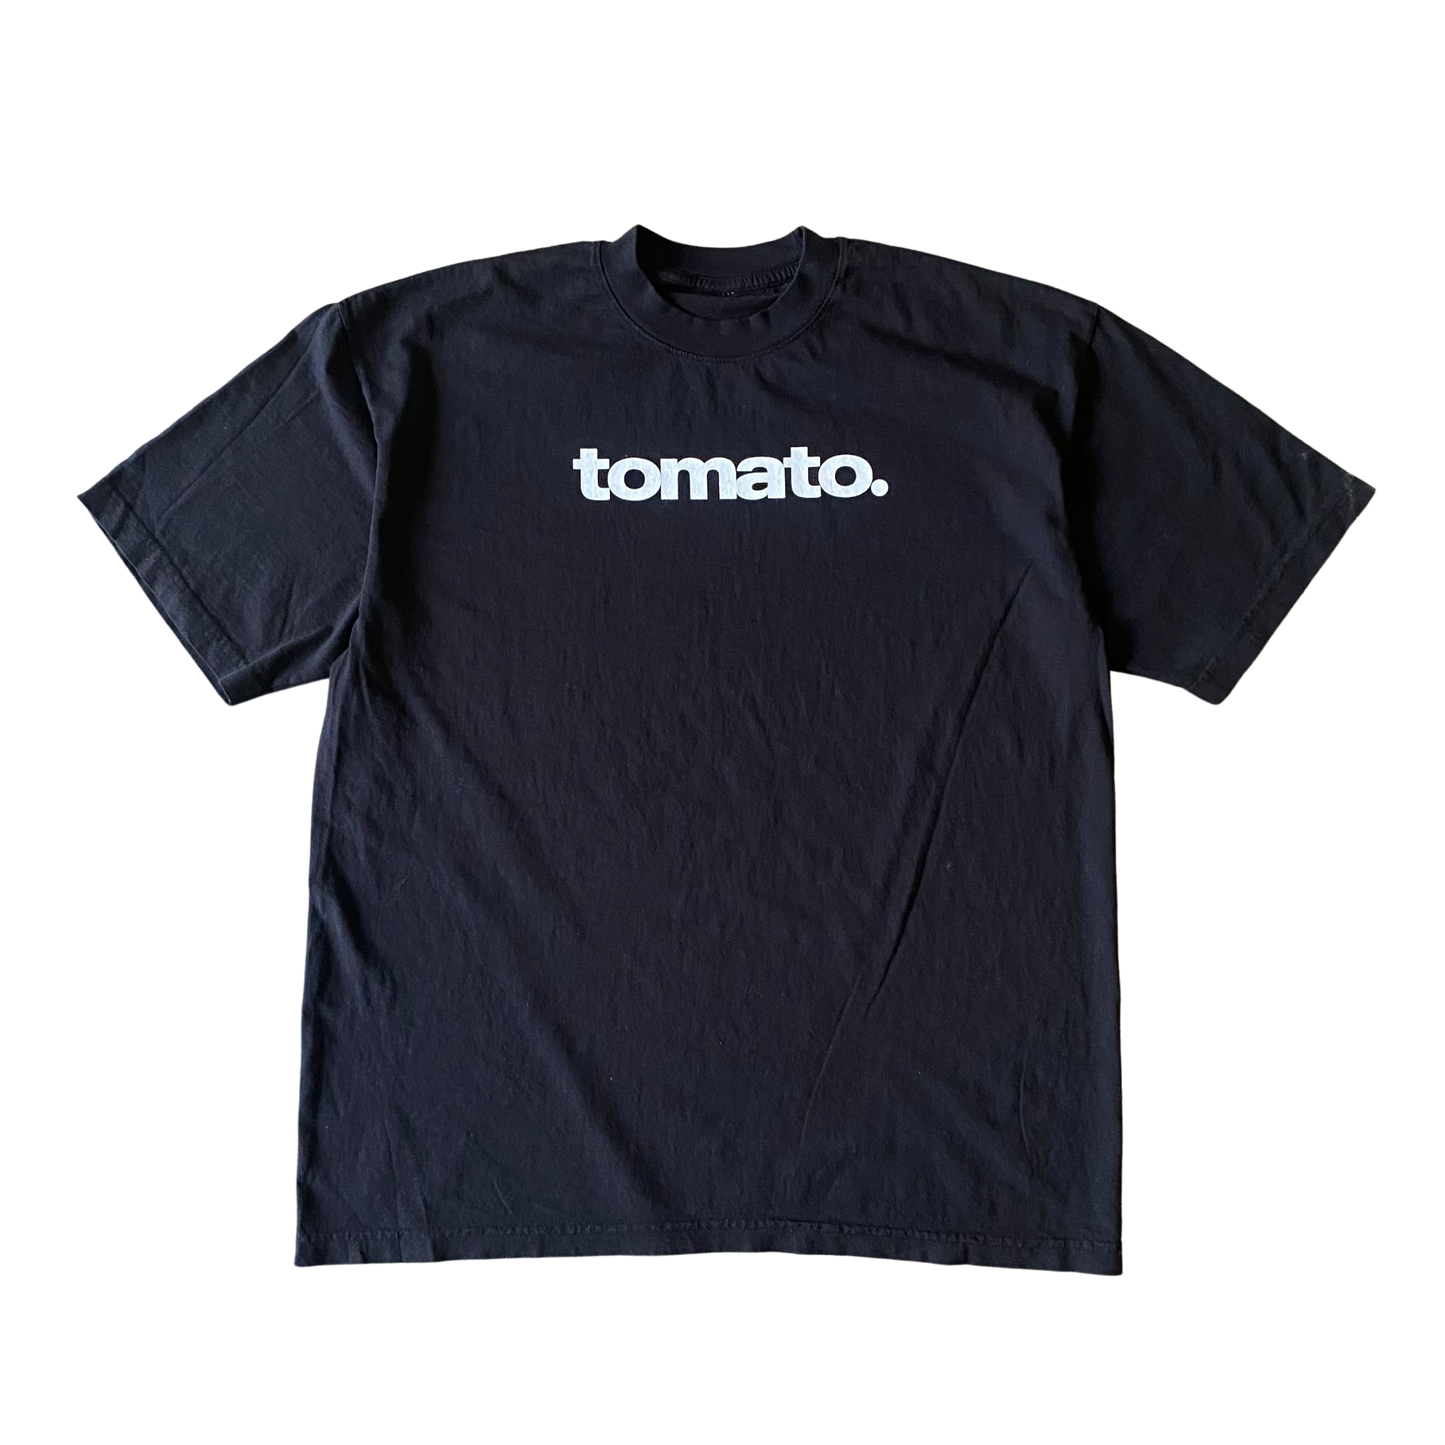 Tomate. Text-T-Shirt